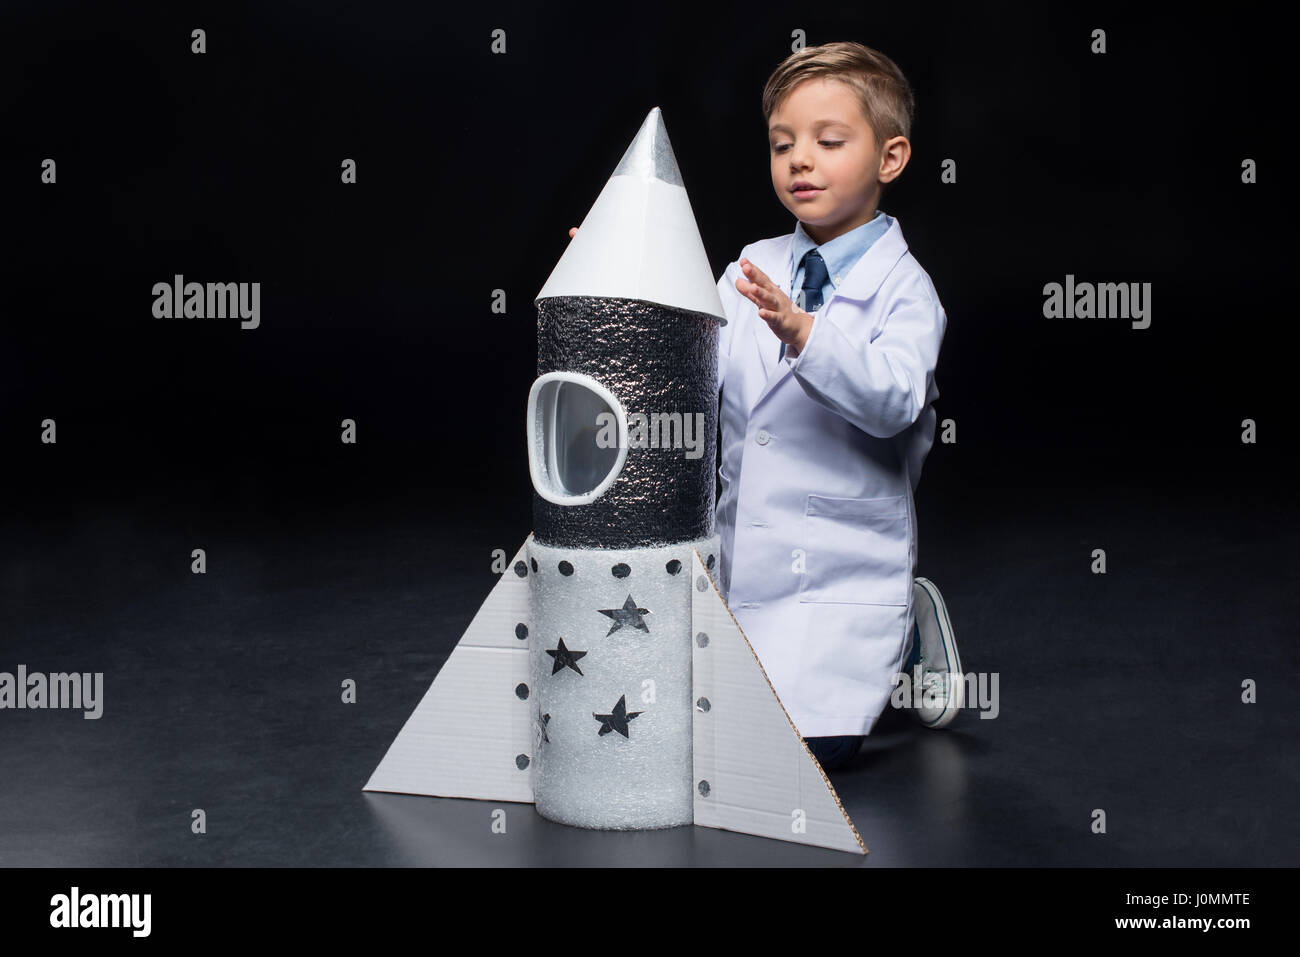 Cute little boy in white coat kneeling and playing with toy rocket Stock Photo